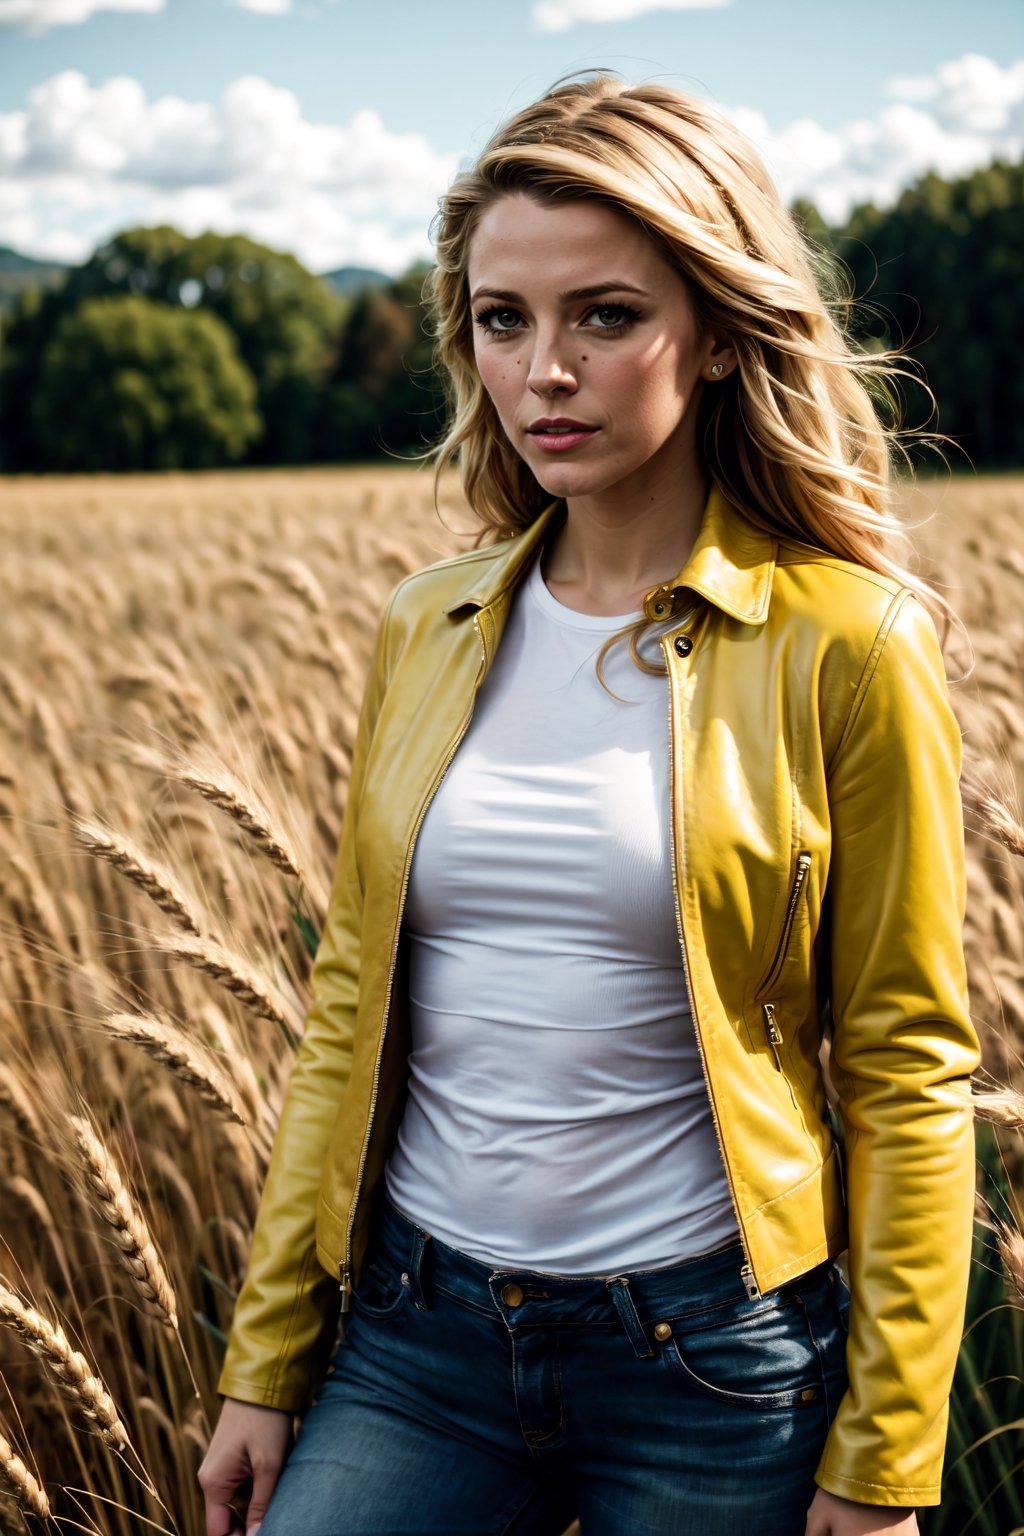 raw photo, fashion photography of cute (Belén Rodríguez), long, blonde hair, wearing leather jacket and ripped jeans, wheat field, picturesque, rural background, upper body shot,sharp, colorful, ultra realistic, cinematic, blue and yellow:0.85)